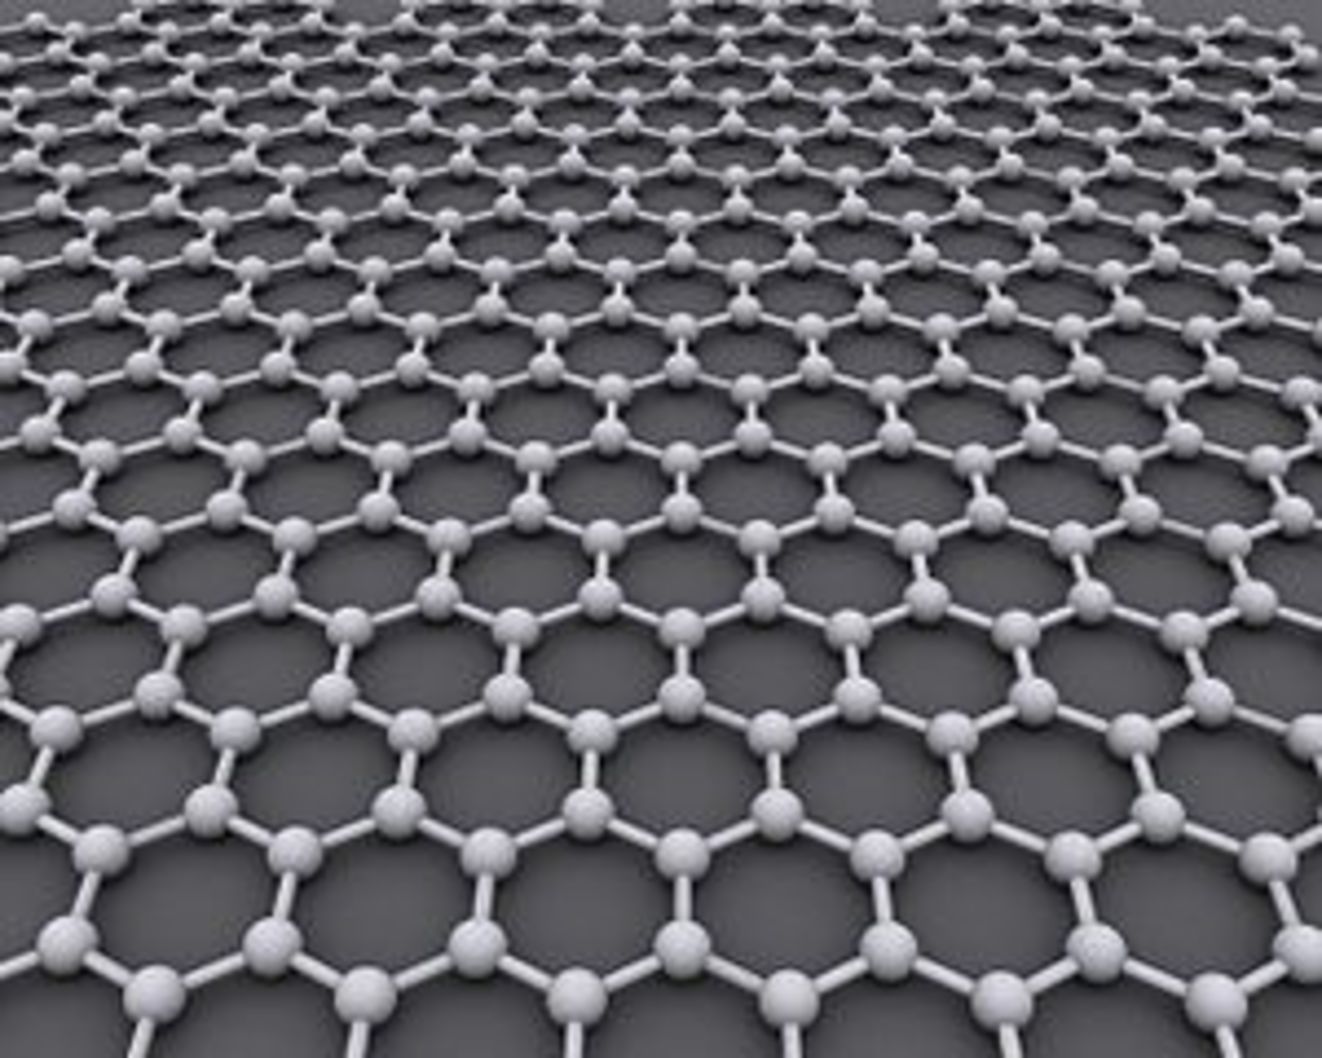 which listed Indian company makes graphene?